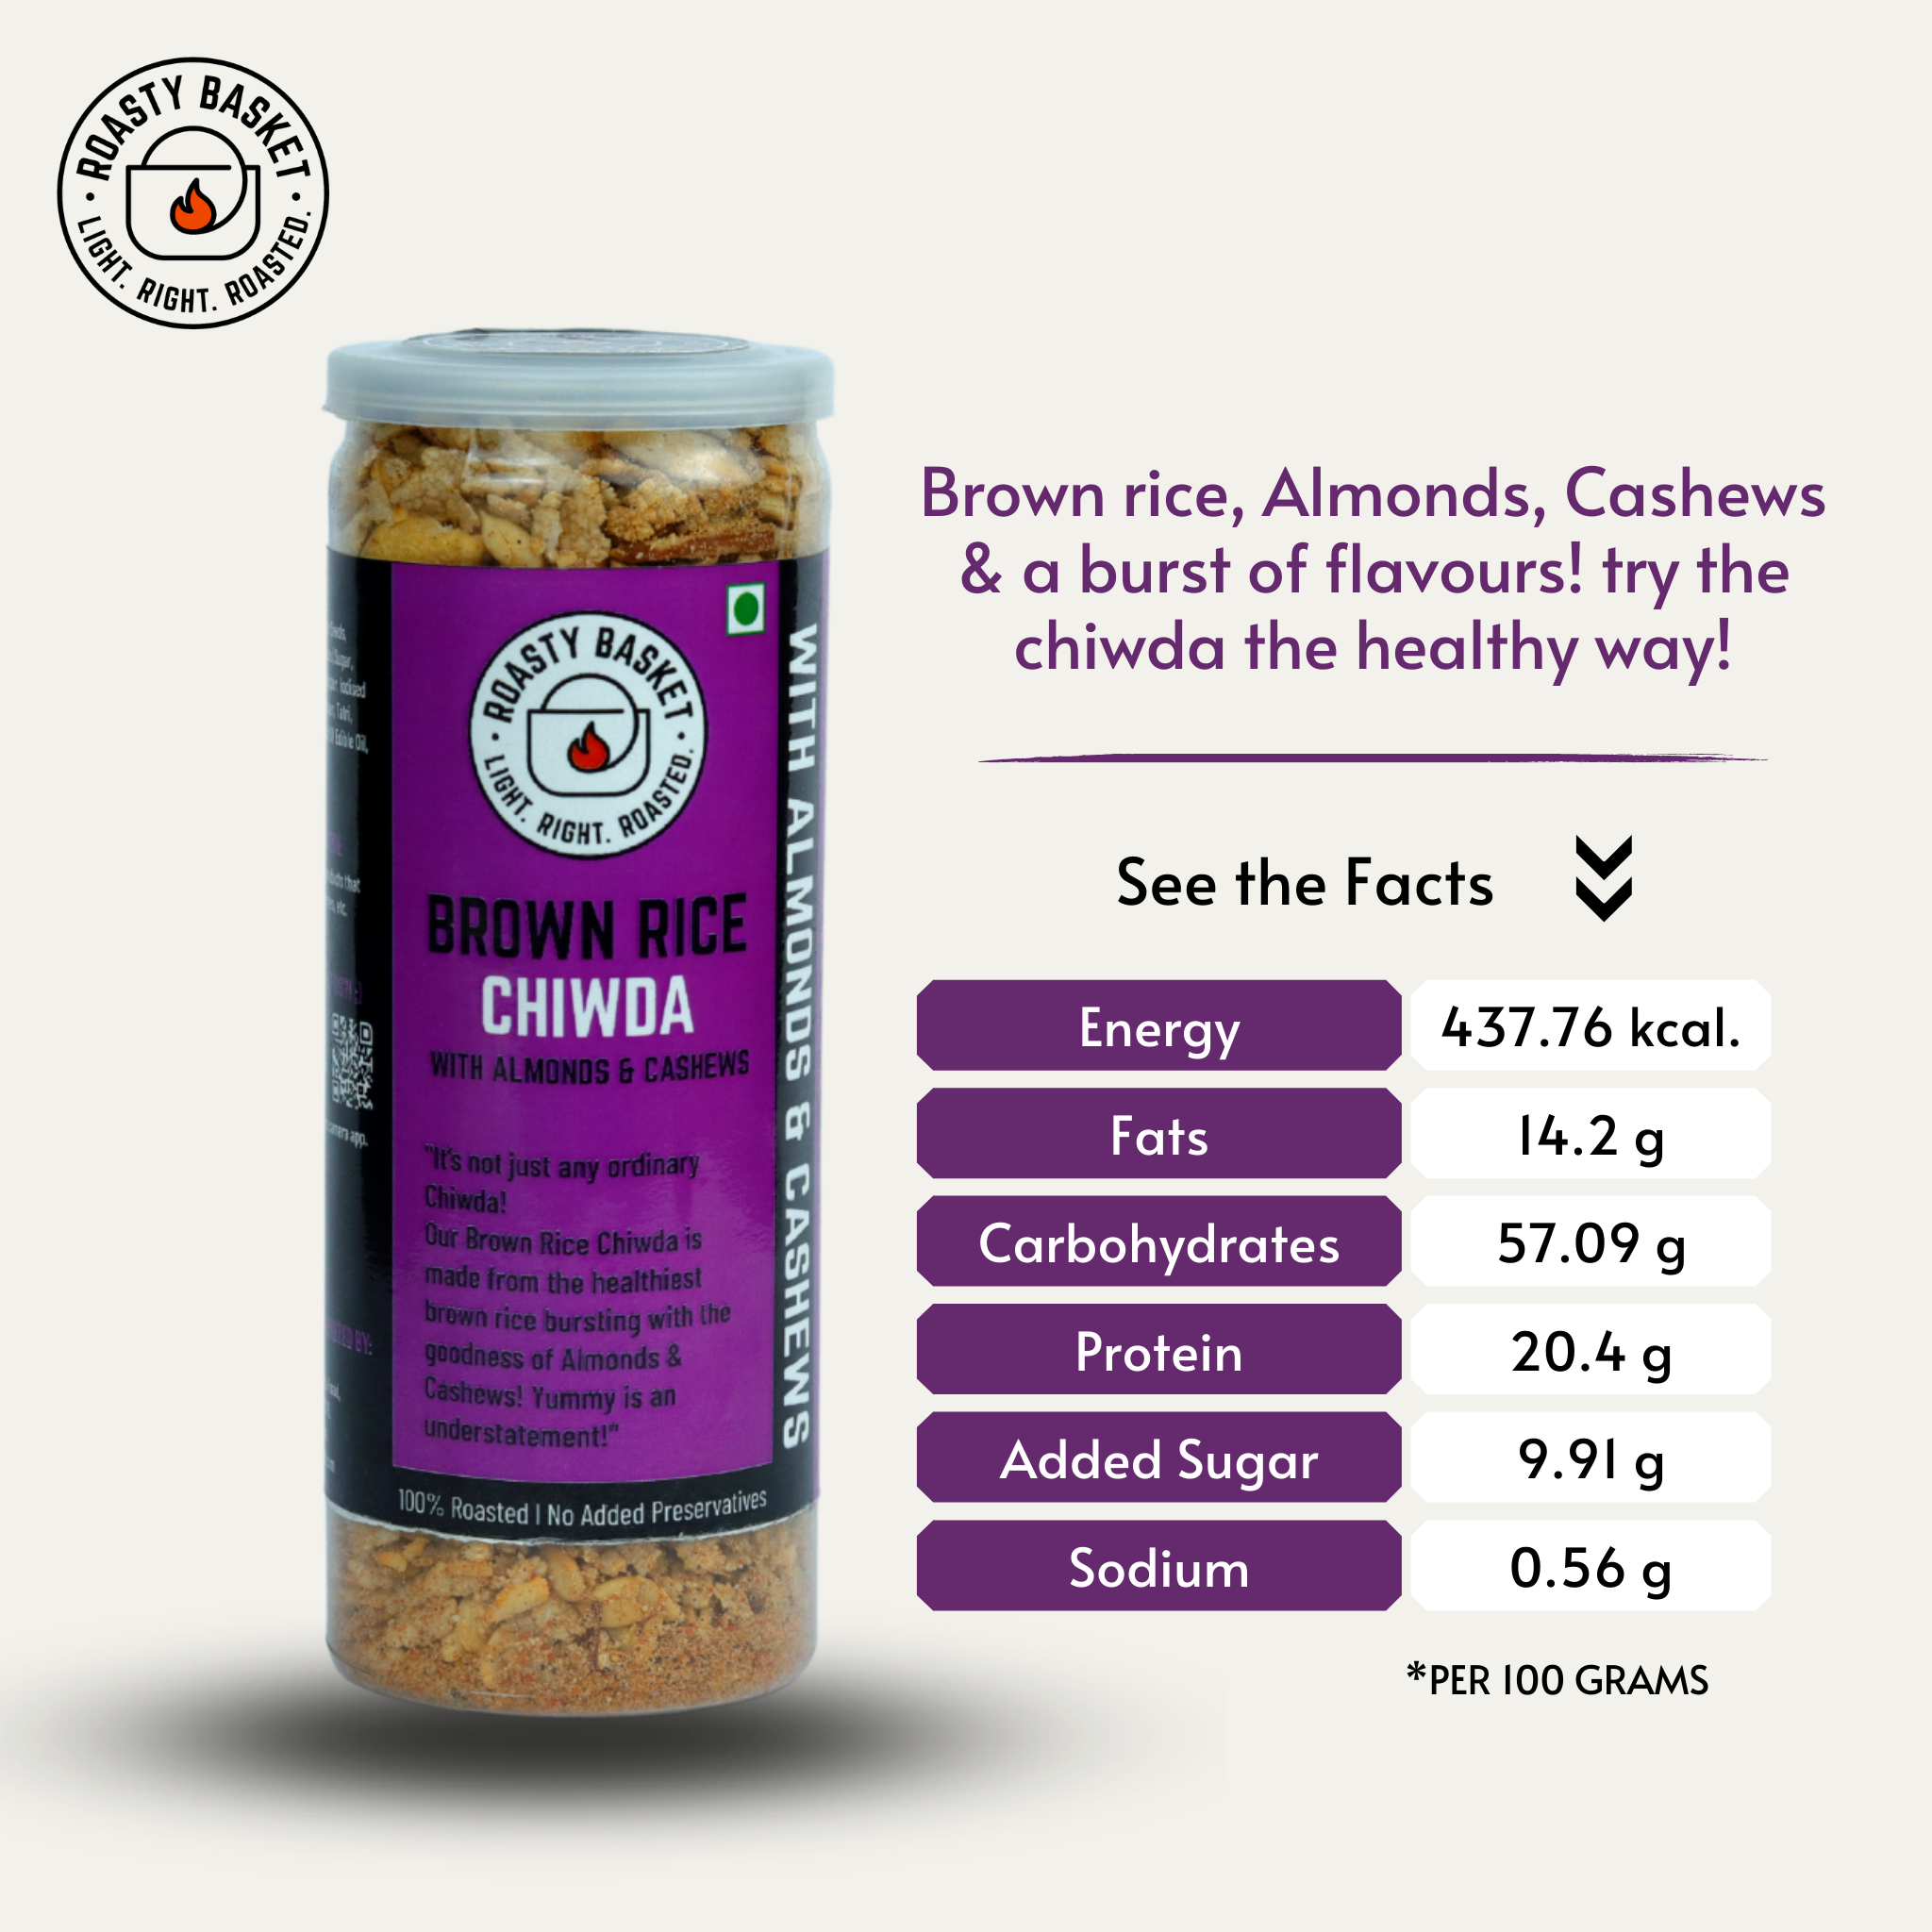 Brown rice chiwda nutritional facts